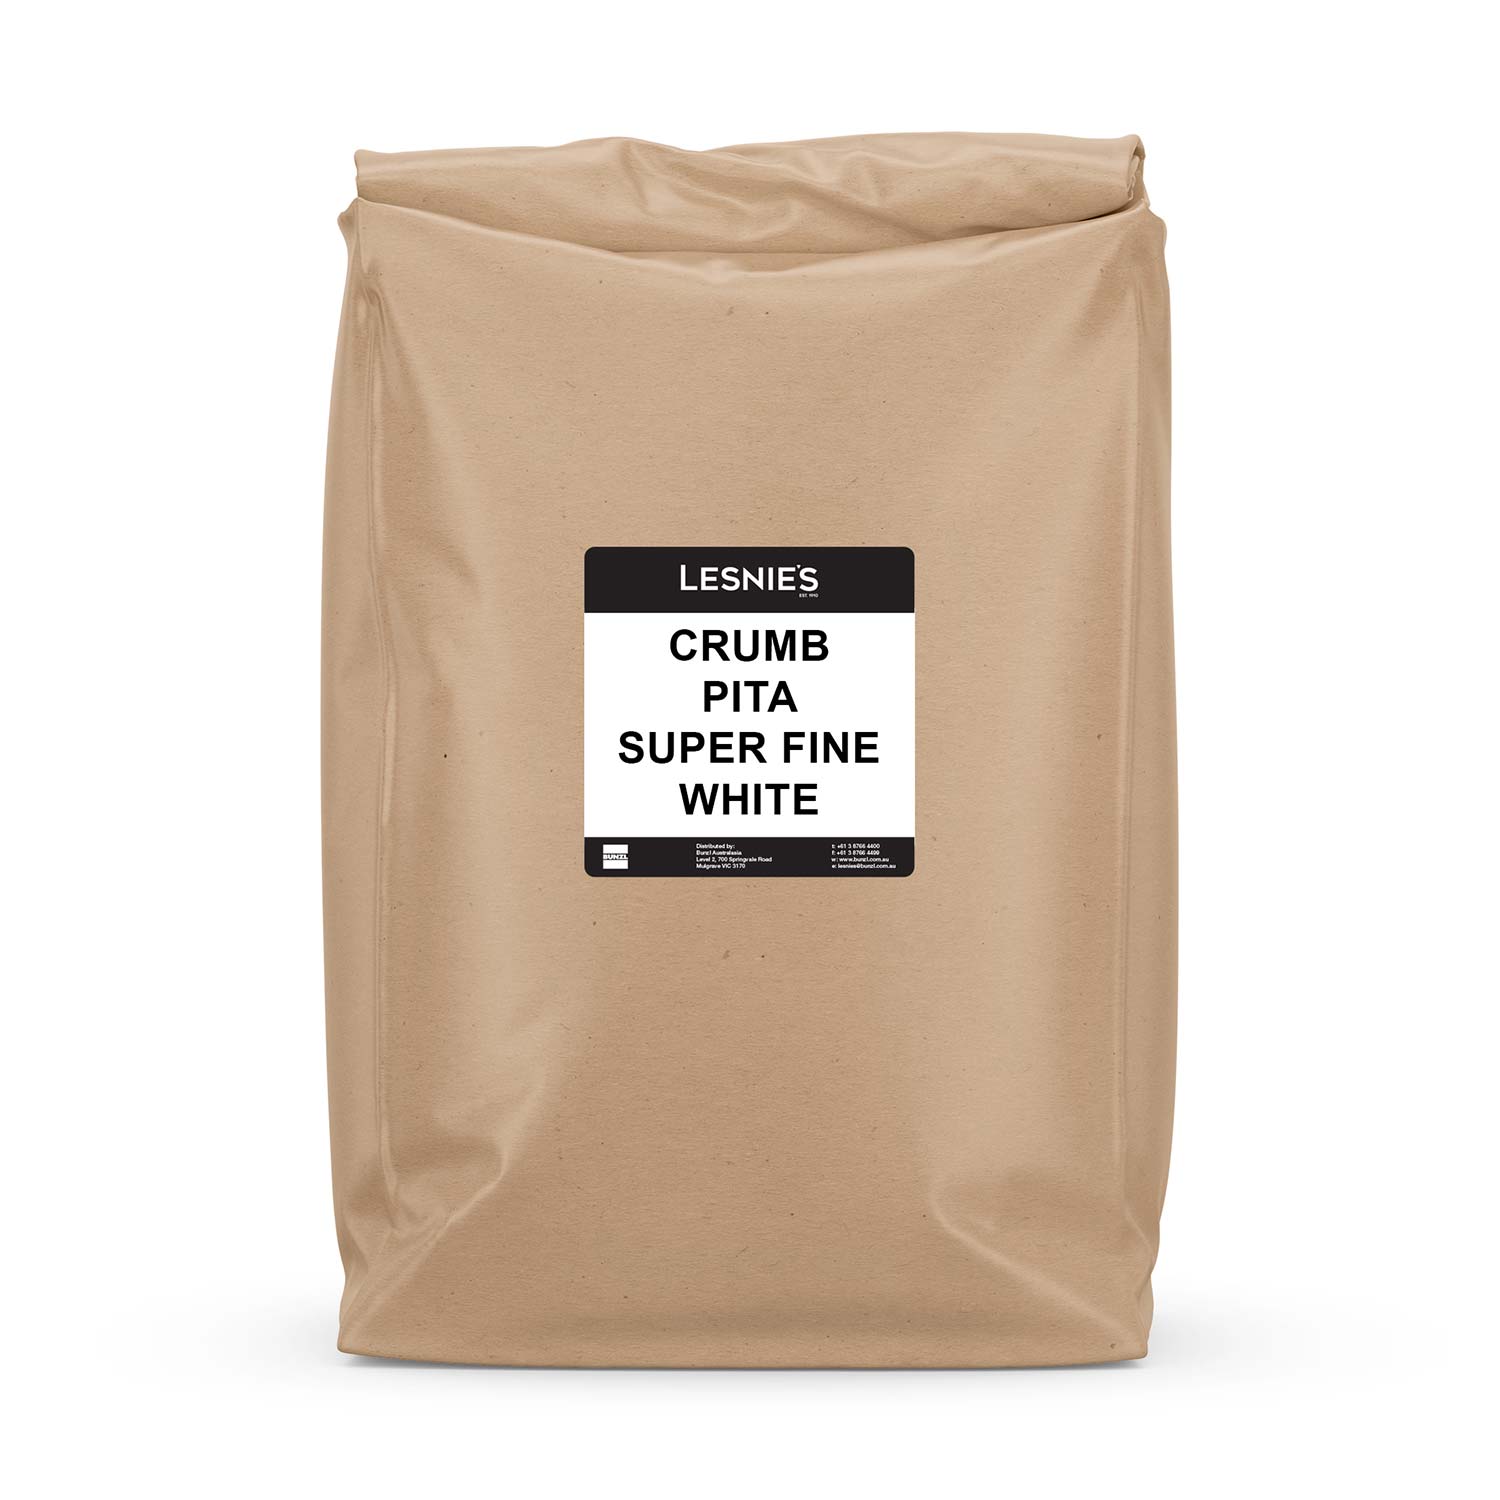 Lesnies Crumb Pita Super Fine White 10kg Cooking Ingredients And Sauces  